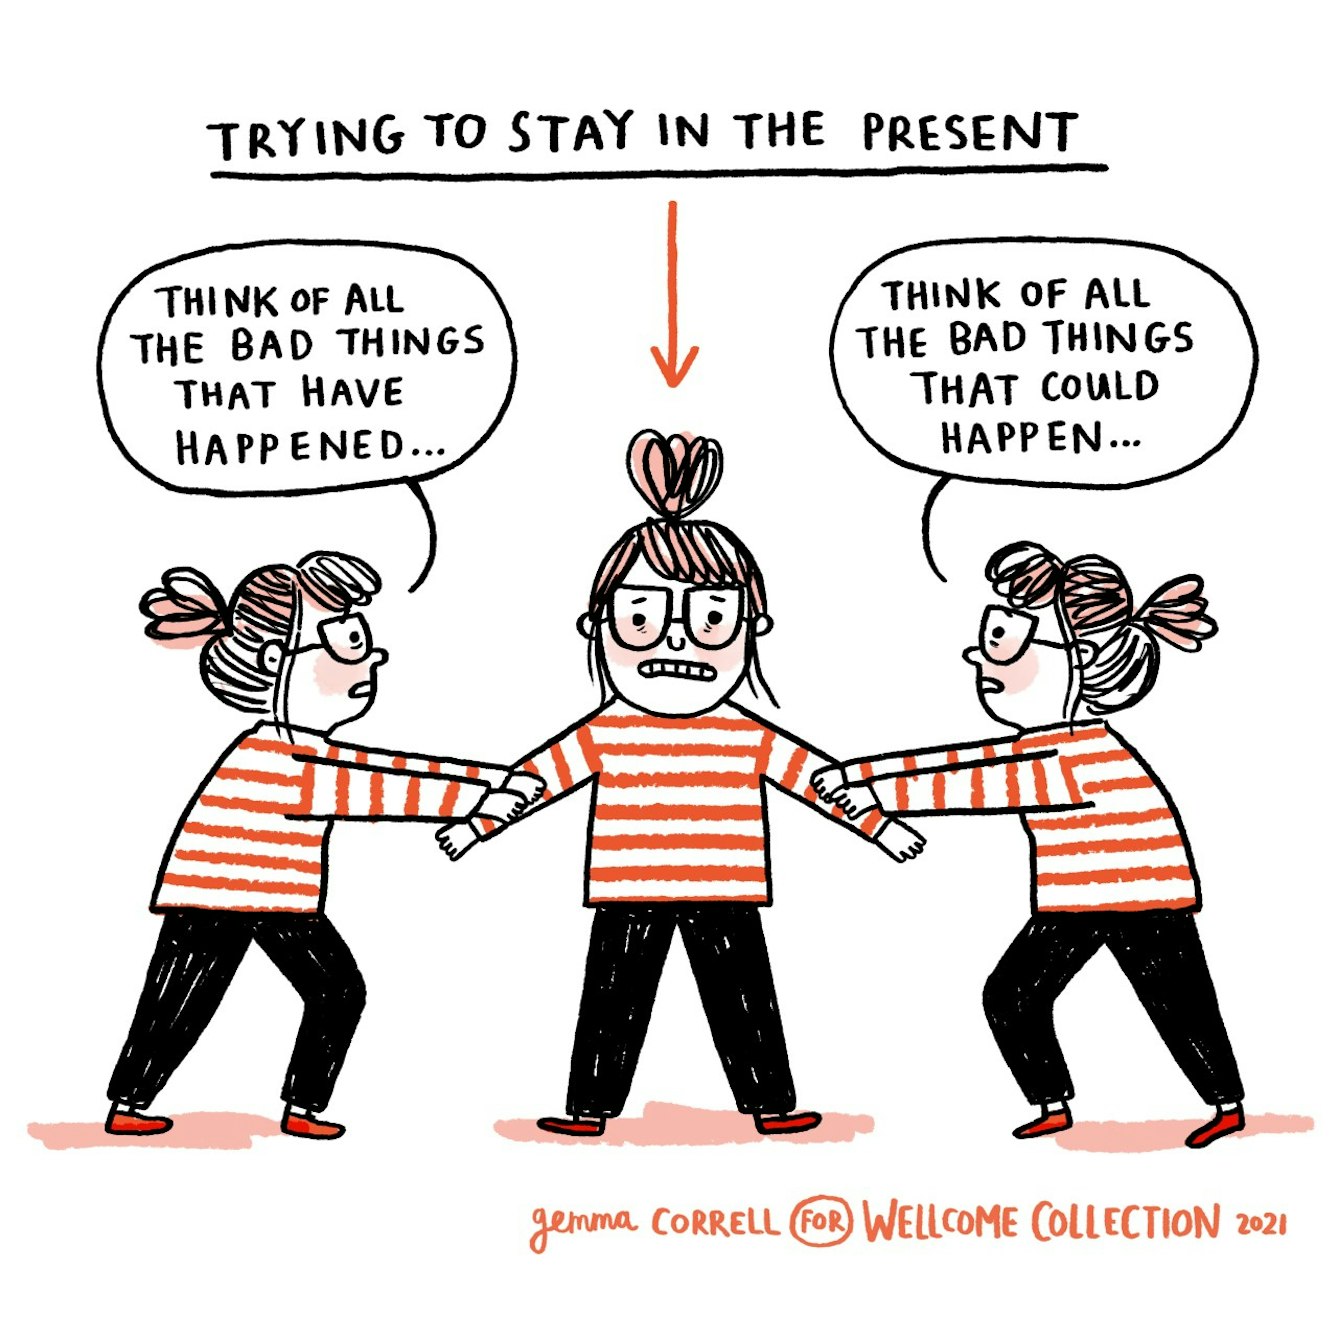 Text at the top reads - “Trying to stay in the present”

An arrow points down to a woman wearing glasses and a striped top and black trousers with her hair in a ponytail is in the centre of the image. She looks anxious and is clenching her teeth. 

To the left is an identical version of the woman, in profile. She looks worried and is holding on to the woman’s arm and saying “Think of all the bad things that have happened…”

To the right is another identical version of the woman, in profile. She looks worried and is holding on to the woman’s other arm and saying “Think of all the bad things that could happen…”